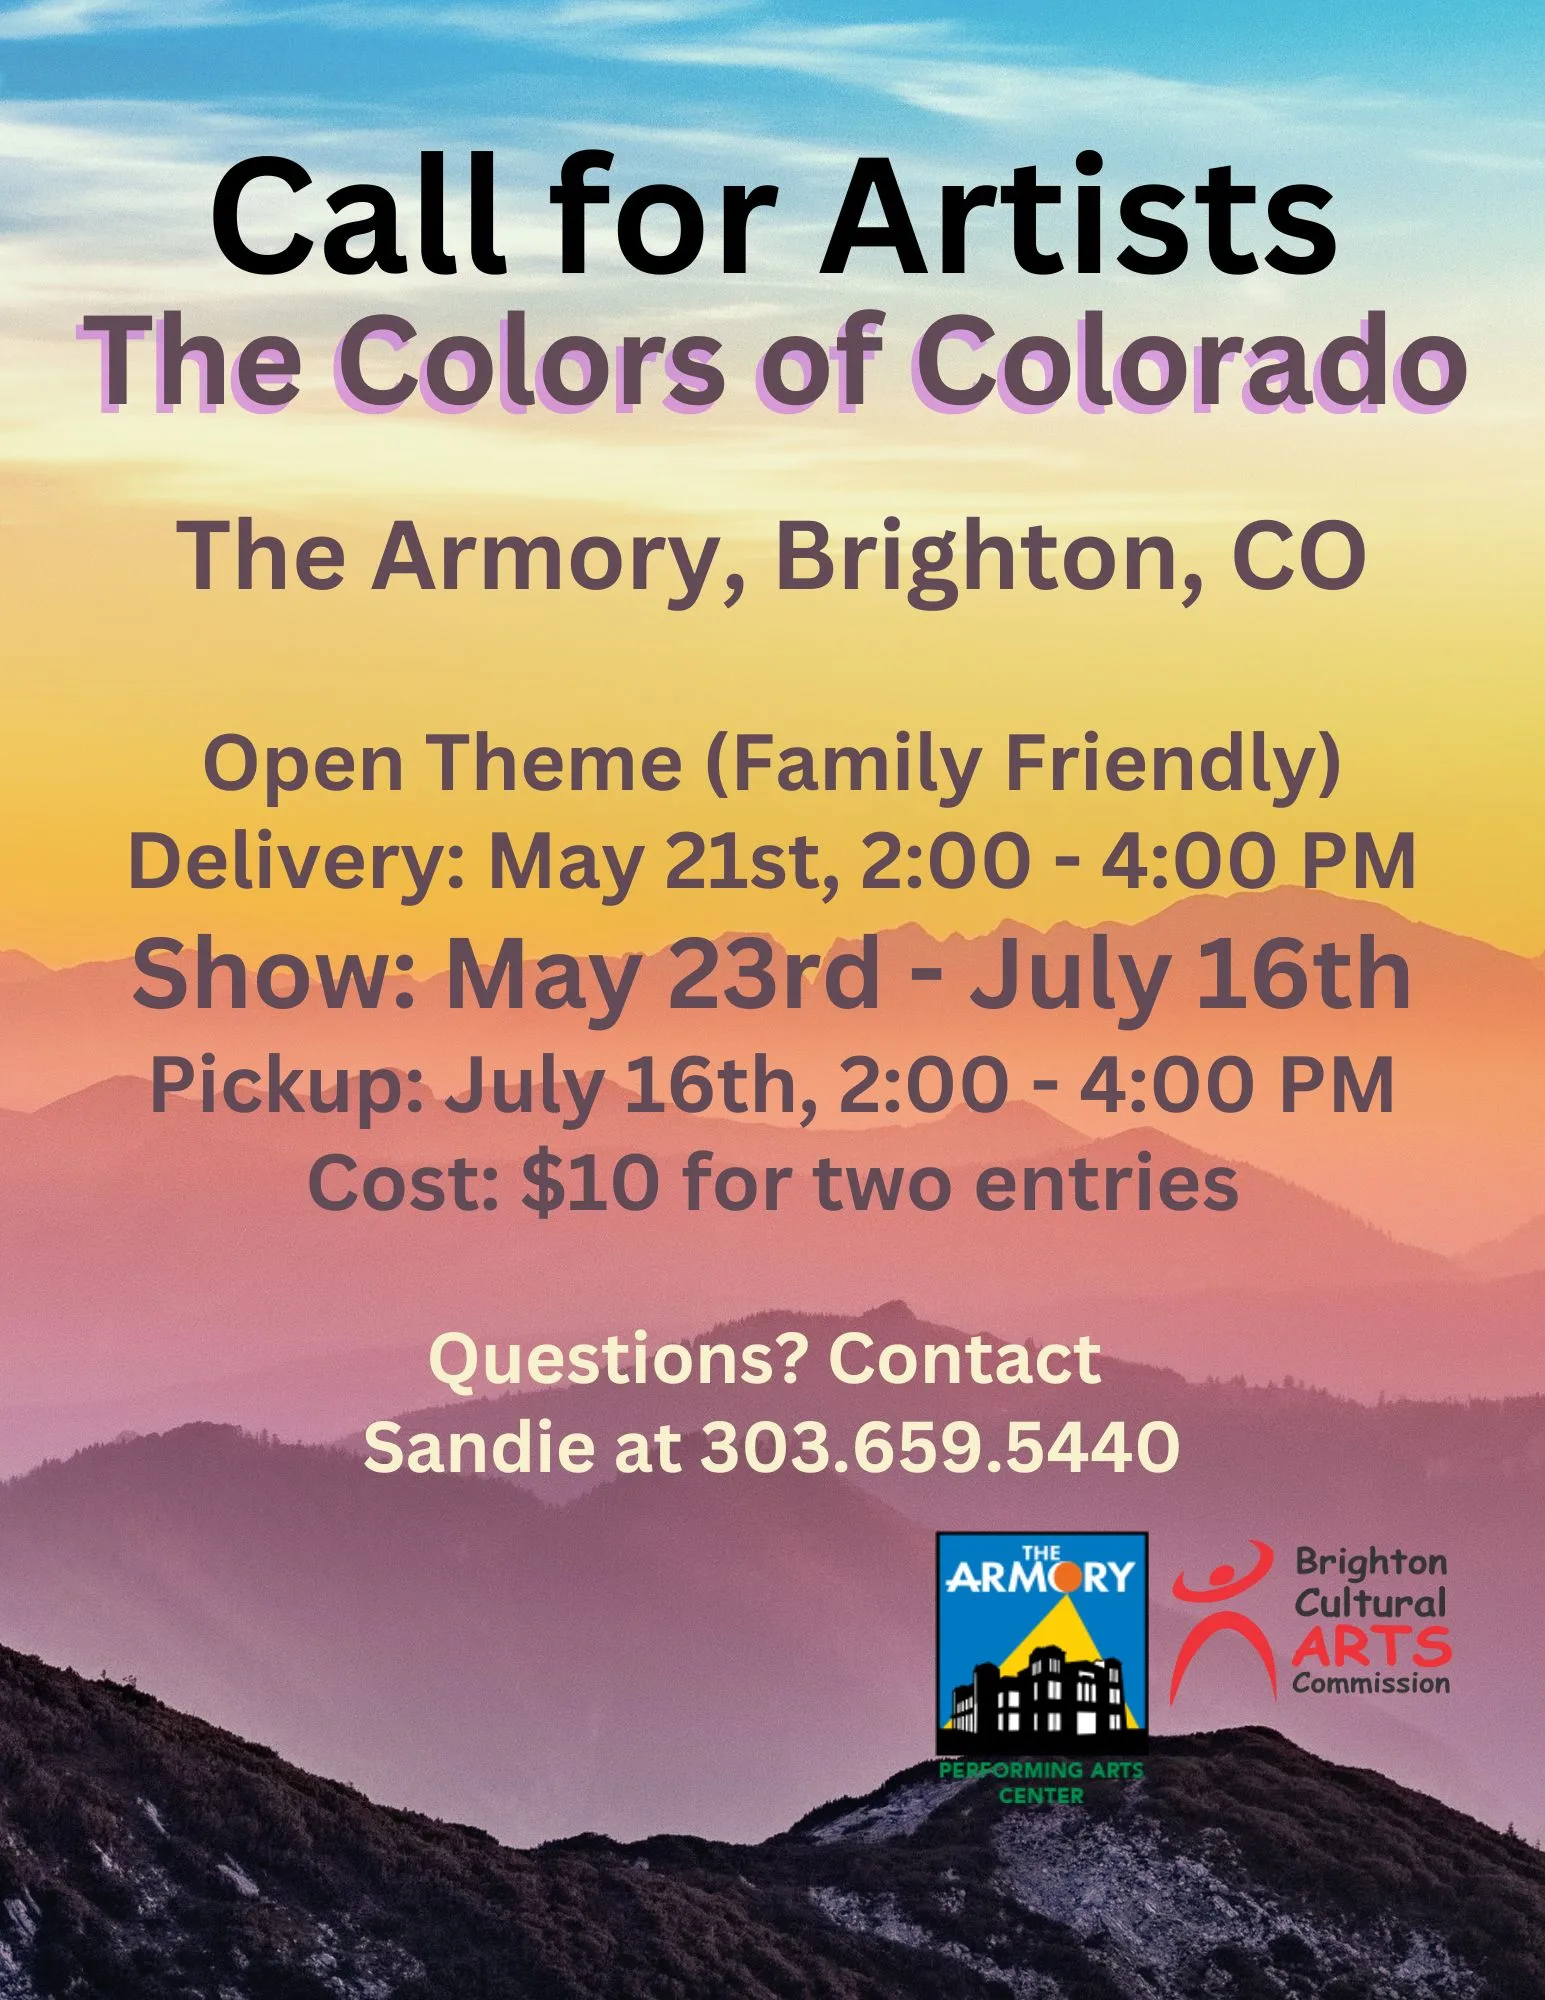 Call for Artists - Armory | The Colors of Colorado